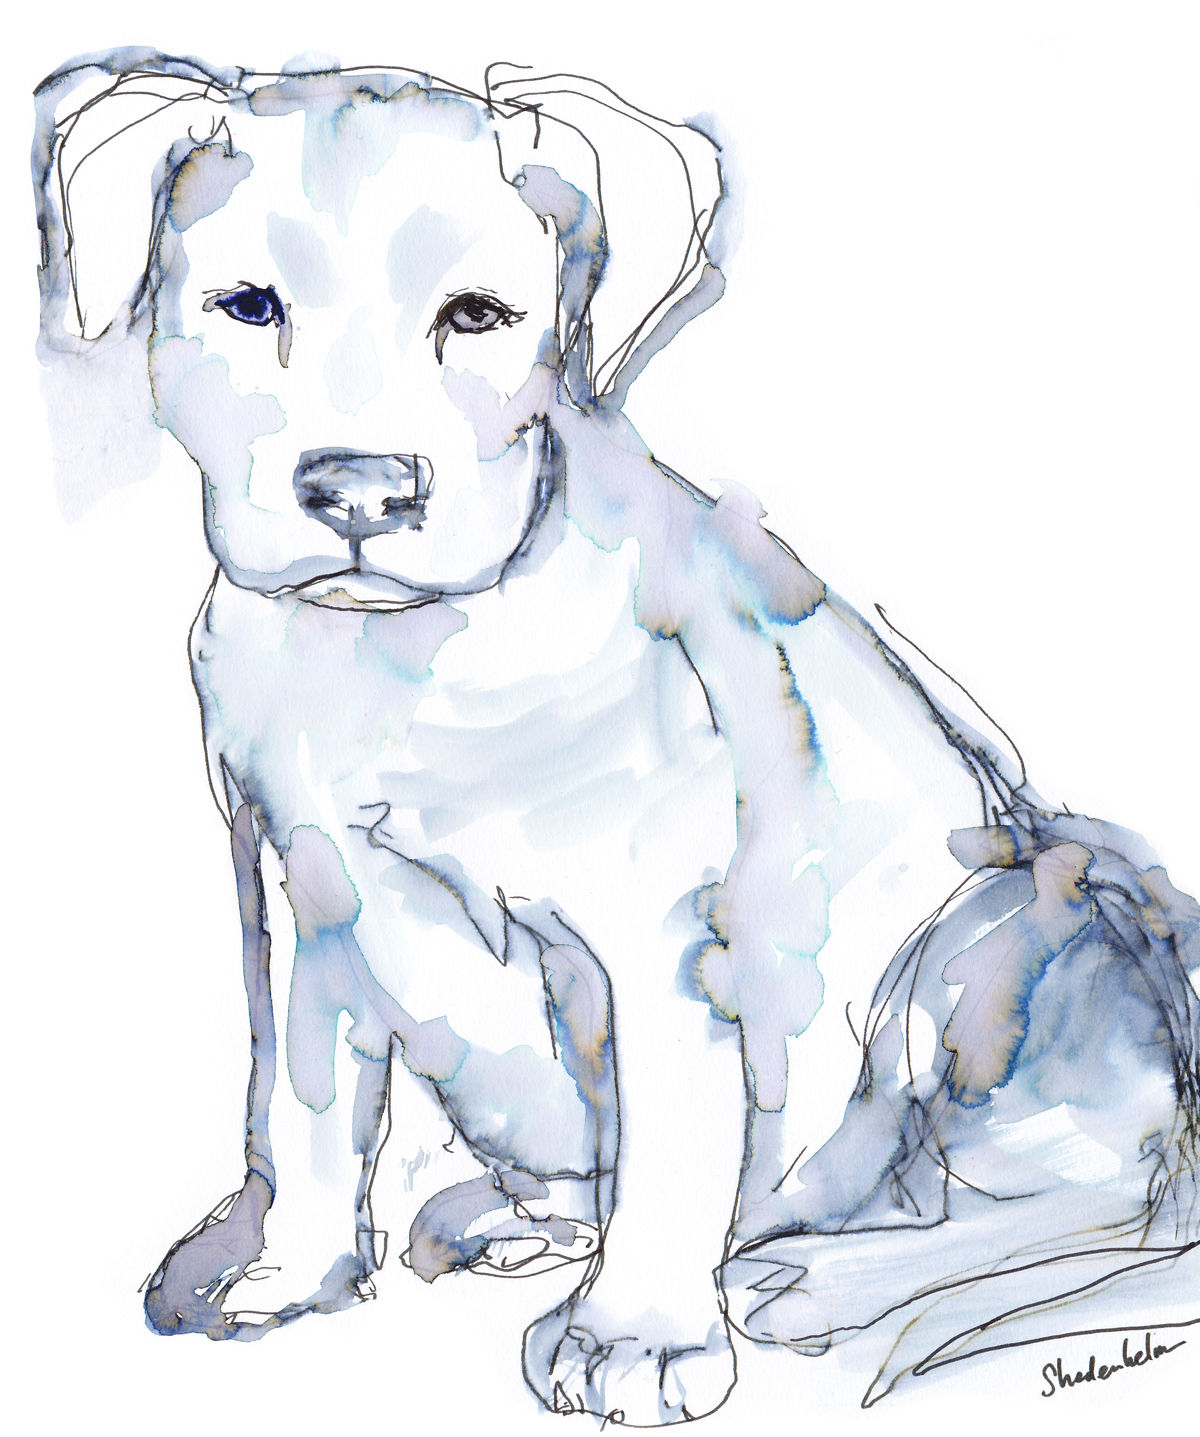 Kendra_Shedenhelm_PaintedWords_Watercolor_Dog_PitBull_Puppy_IMG_20170508_0006_SM.jpg